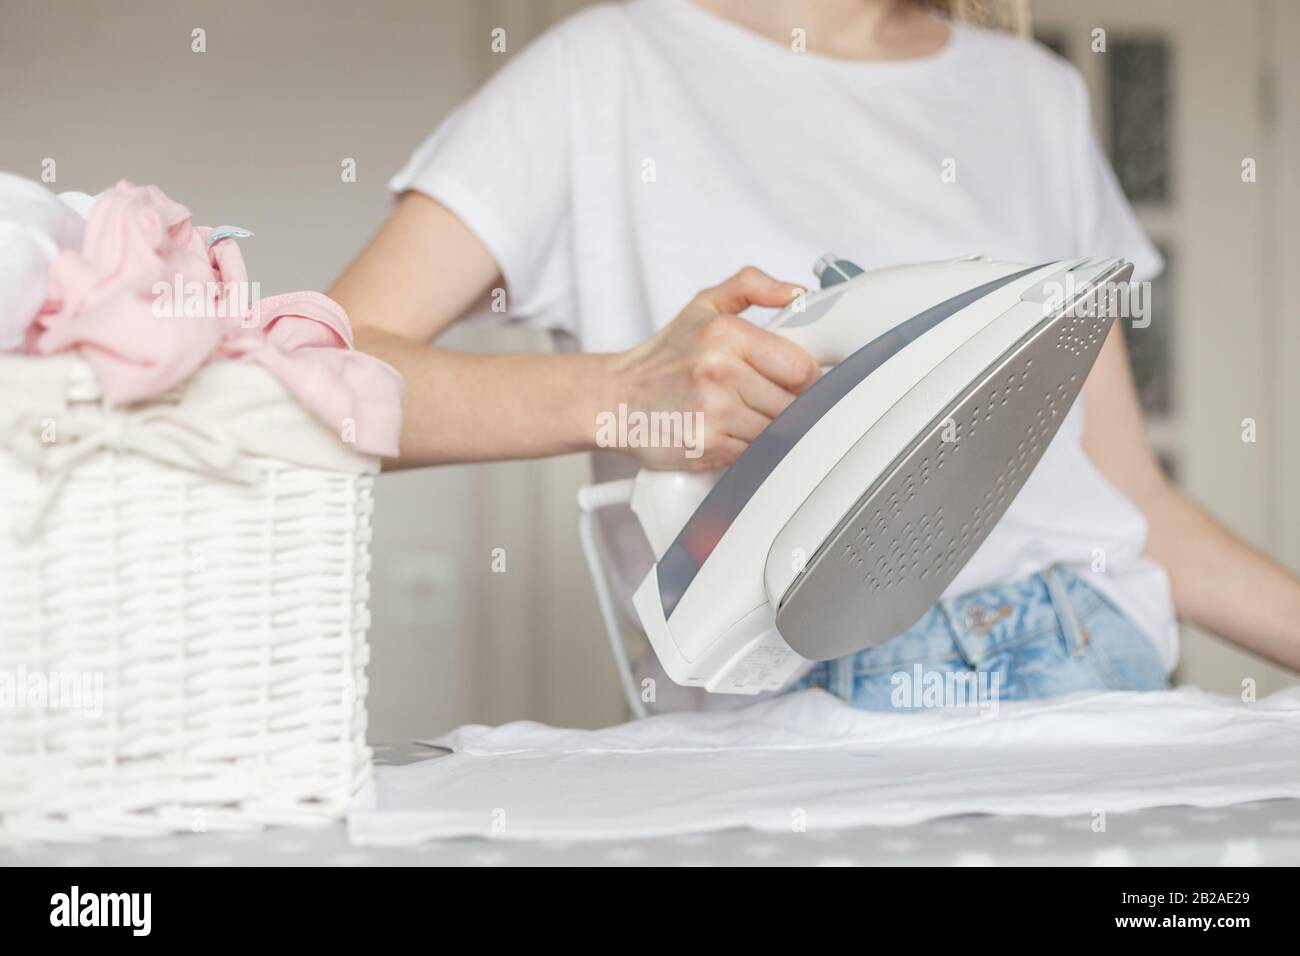 Ironing cloth stock image. Image of clothes, household - 39833861